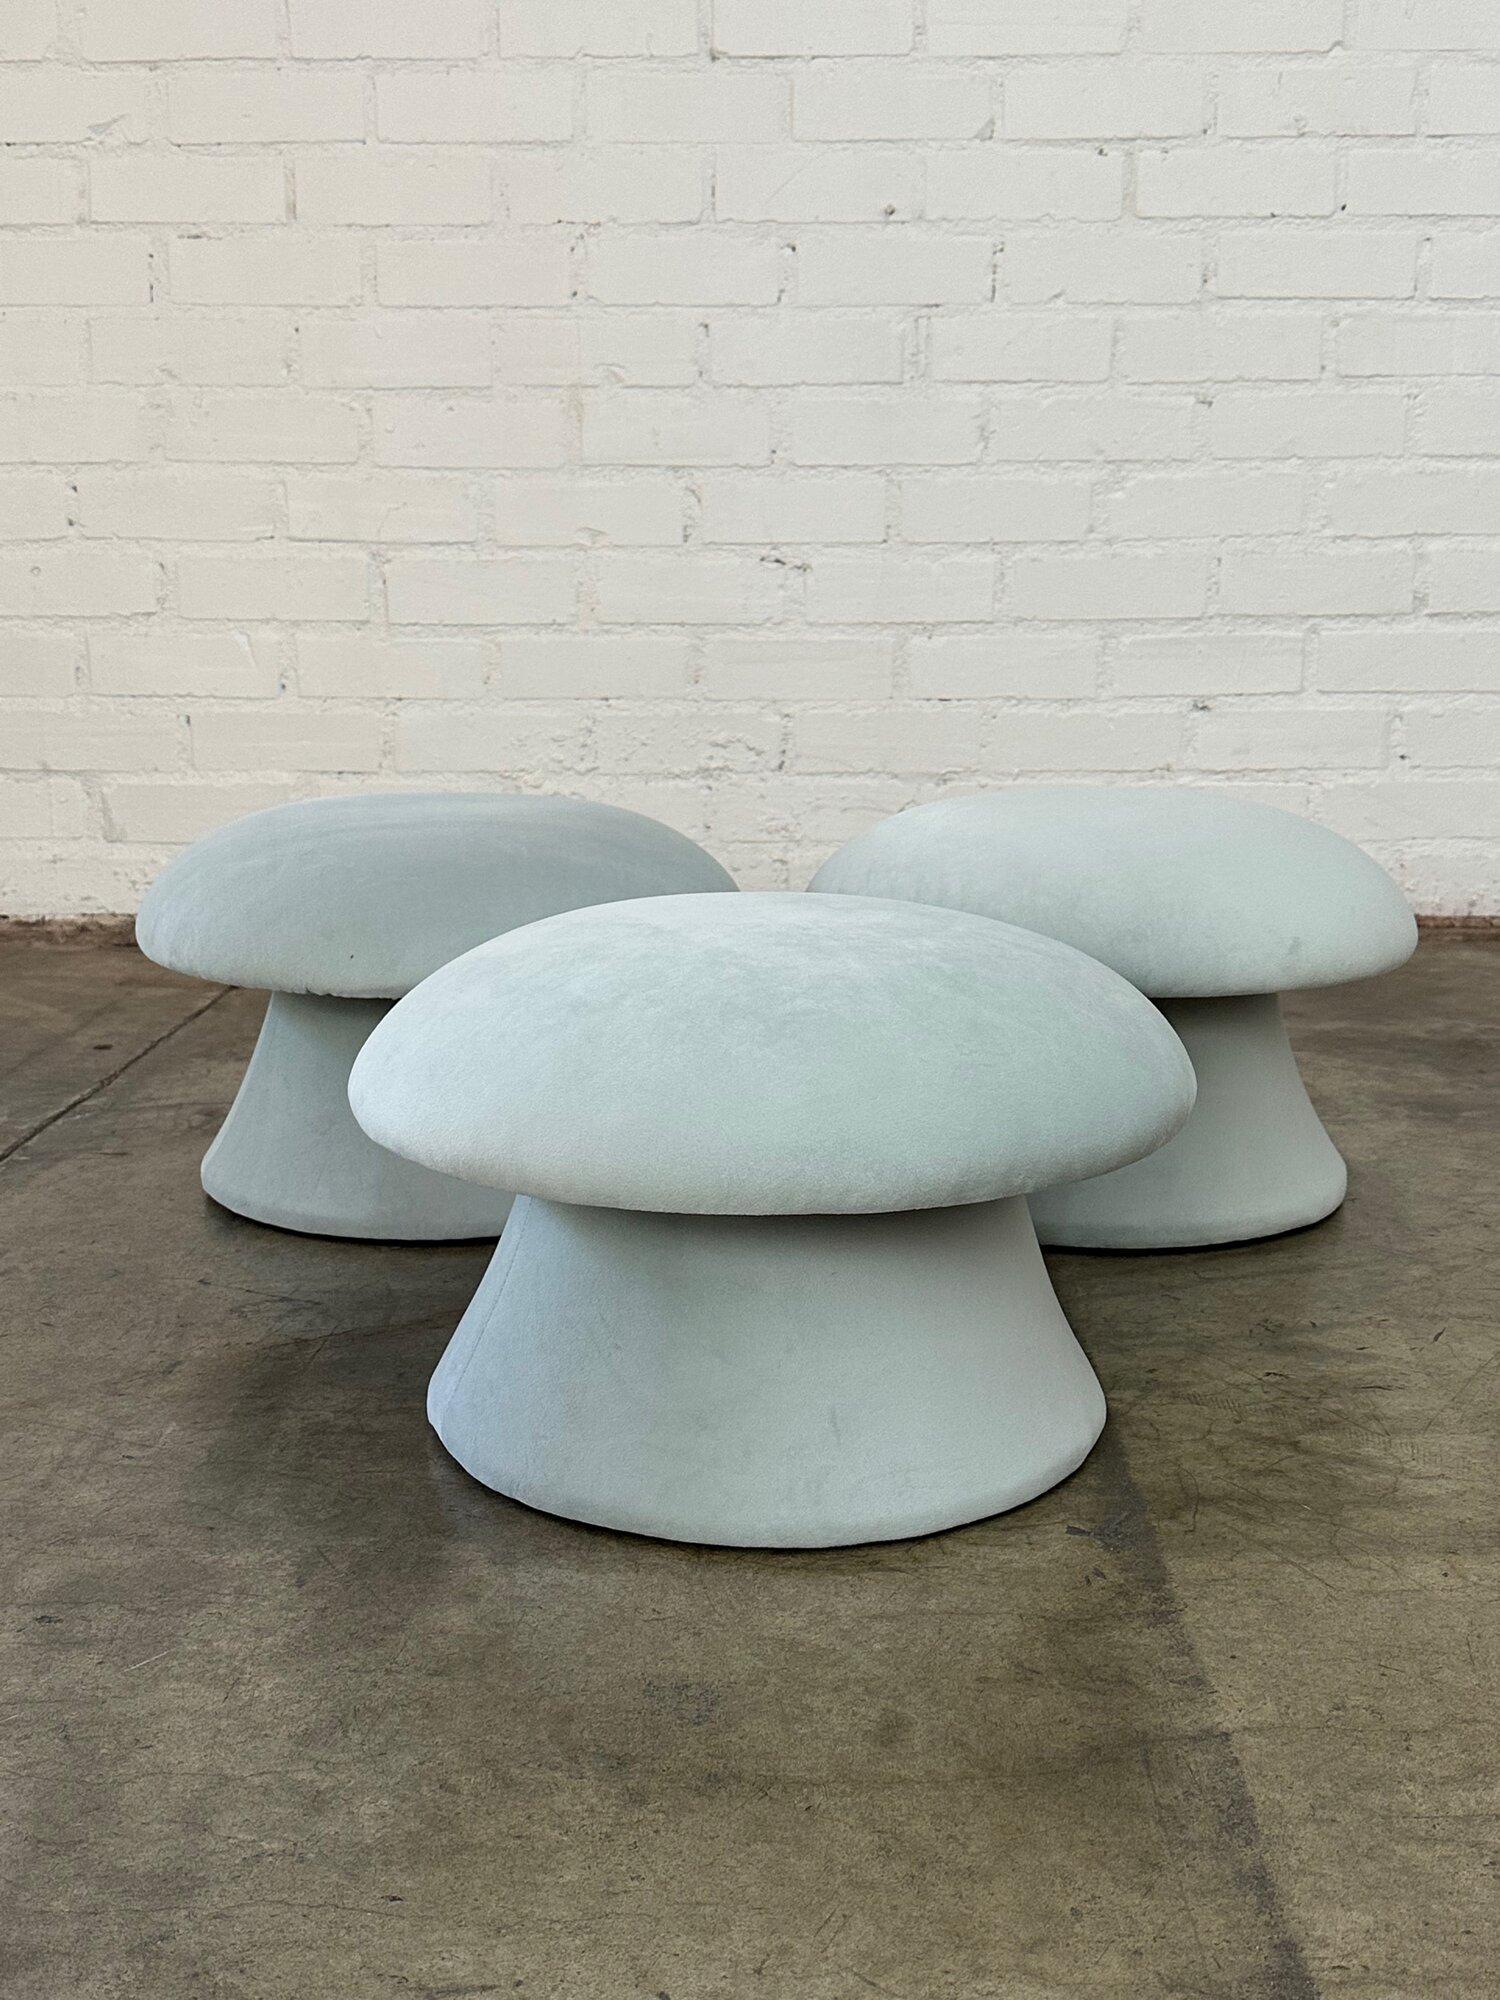 W20 D20 H11

Mushroom ottoman custom made in baby blue velvet. Mushroom has a tapered center and flares out towards bottom of base.

Want a different color or size? Fabric and dimensions are customizable.Email us to order a custom mushroom